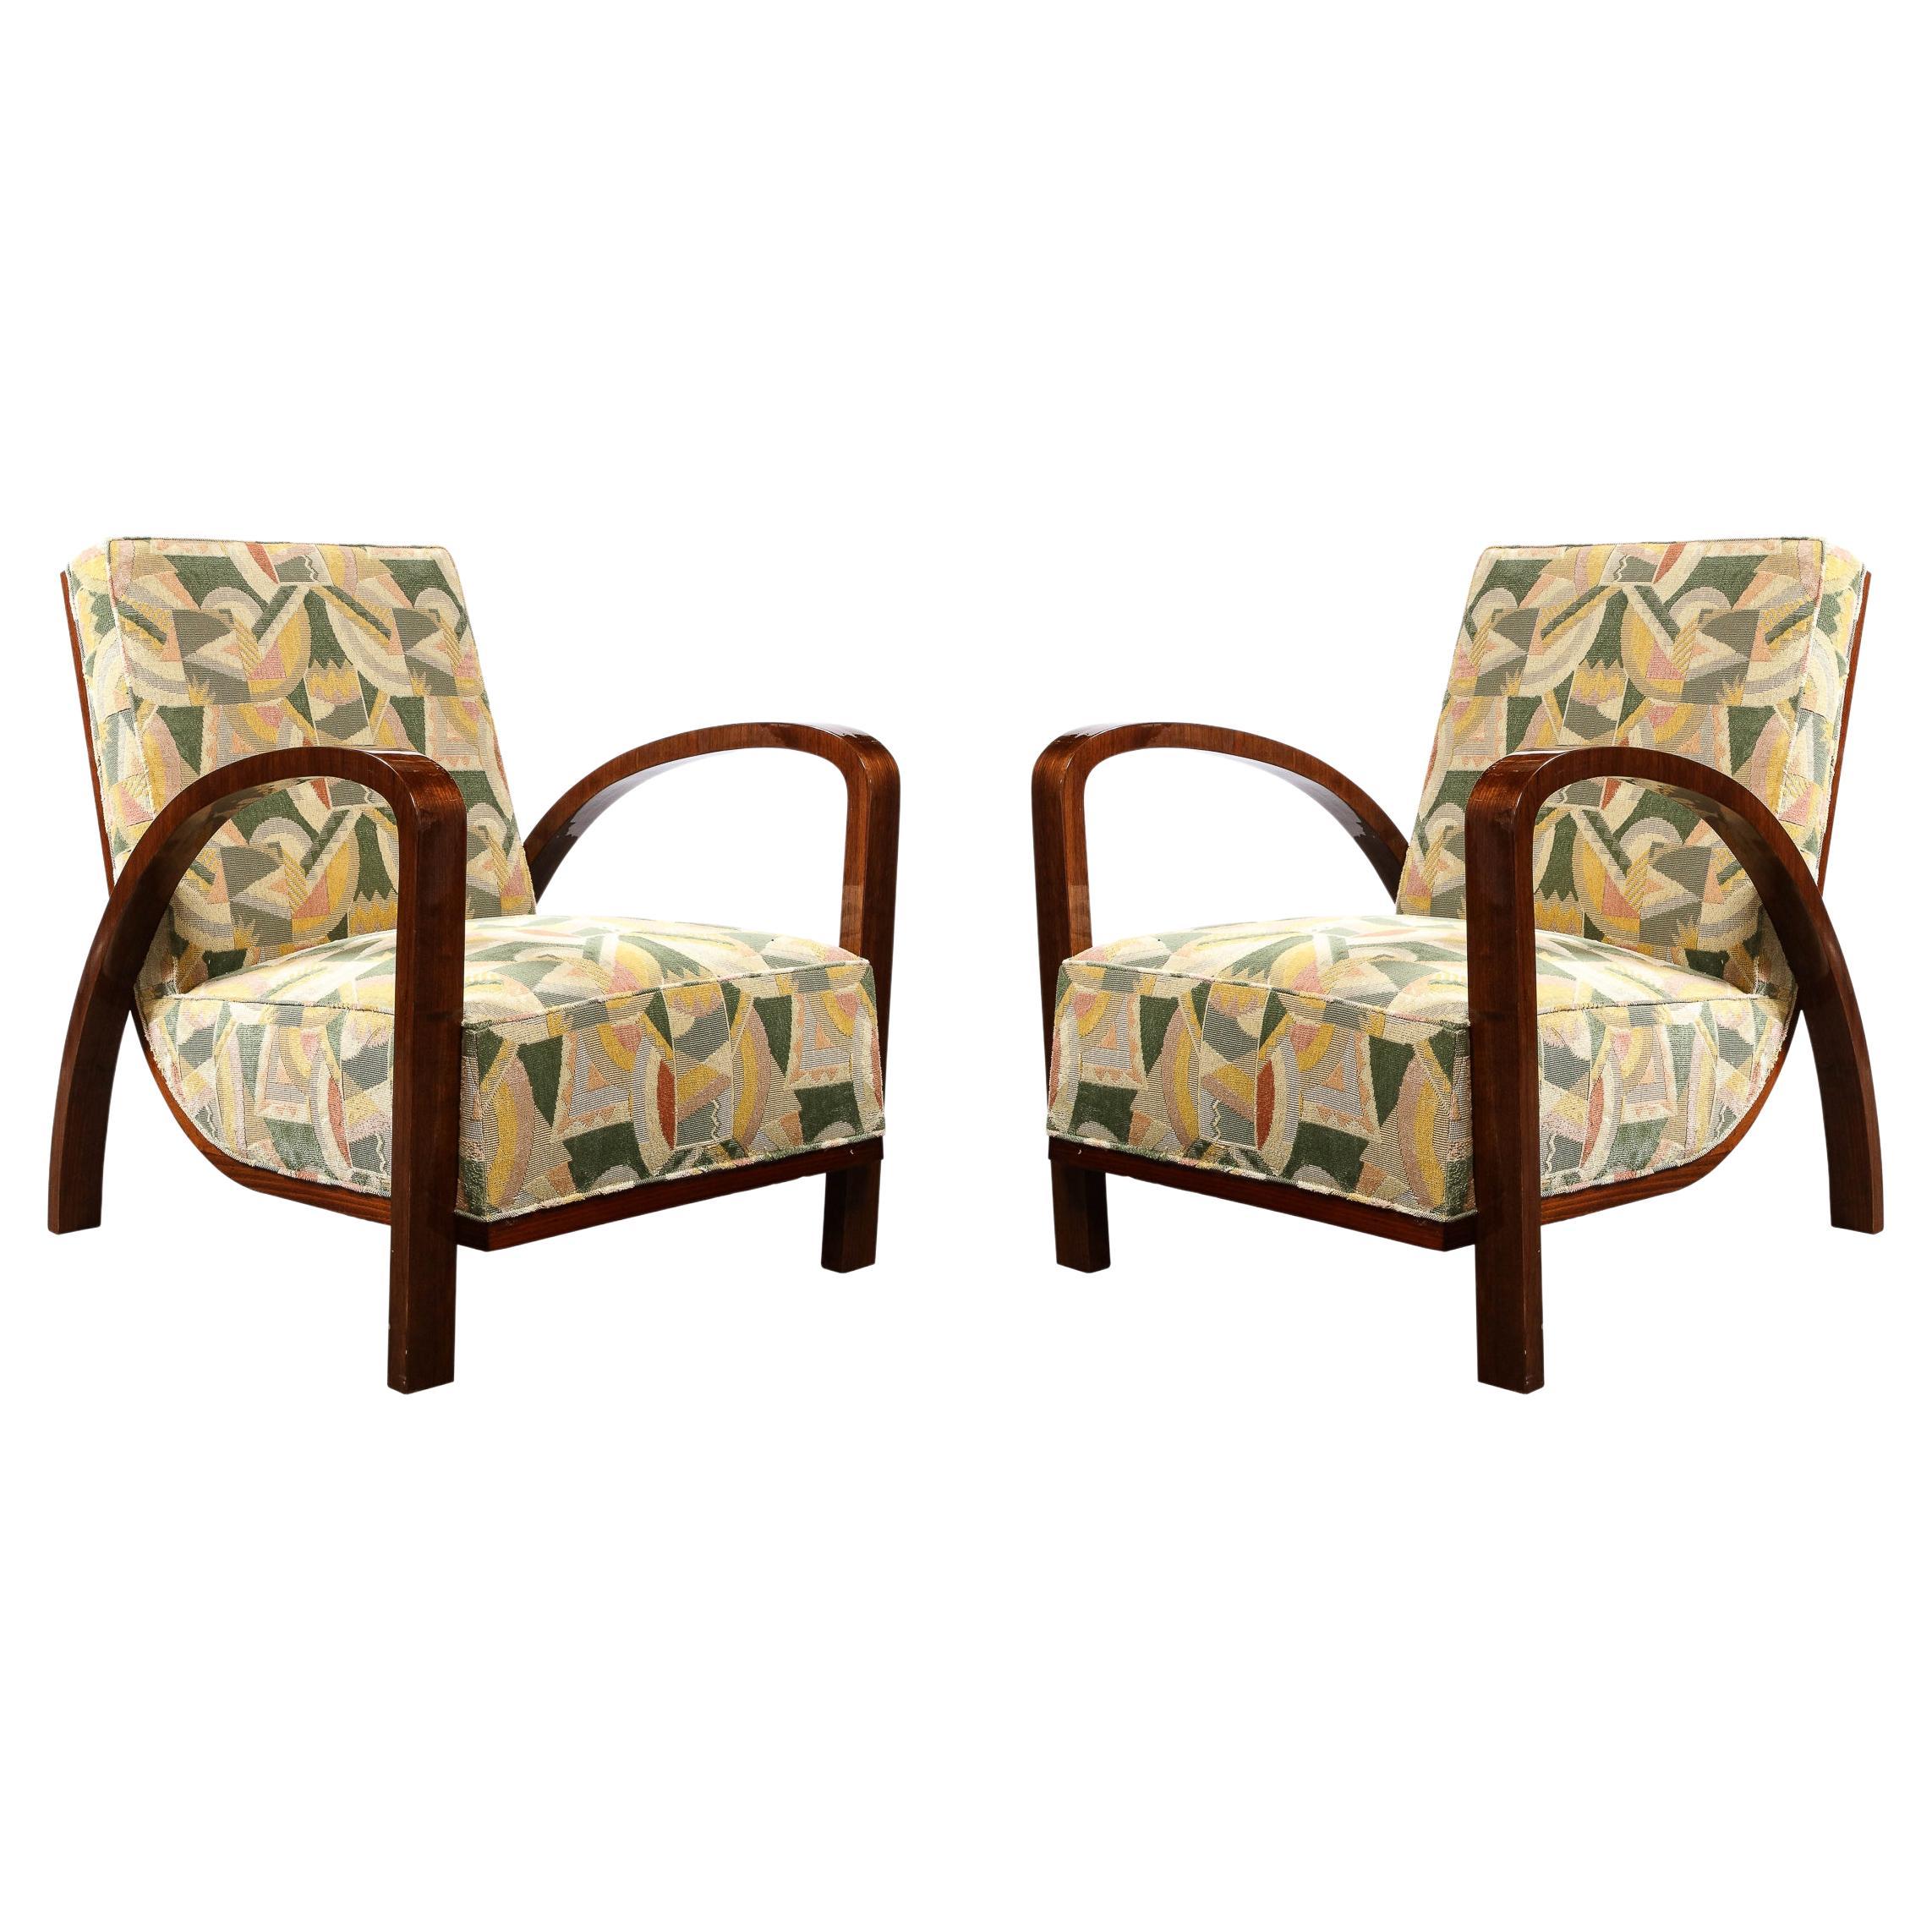 Pair of Art Deco Halabala Arm Chairs in Walnut & Rare Clarence House Fabric For Sale